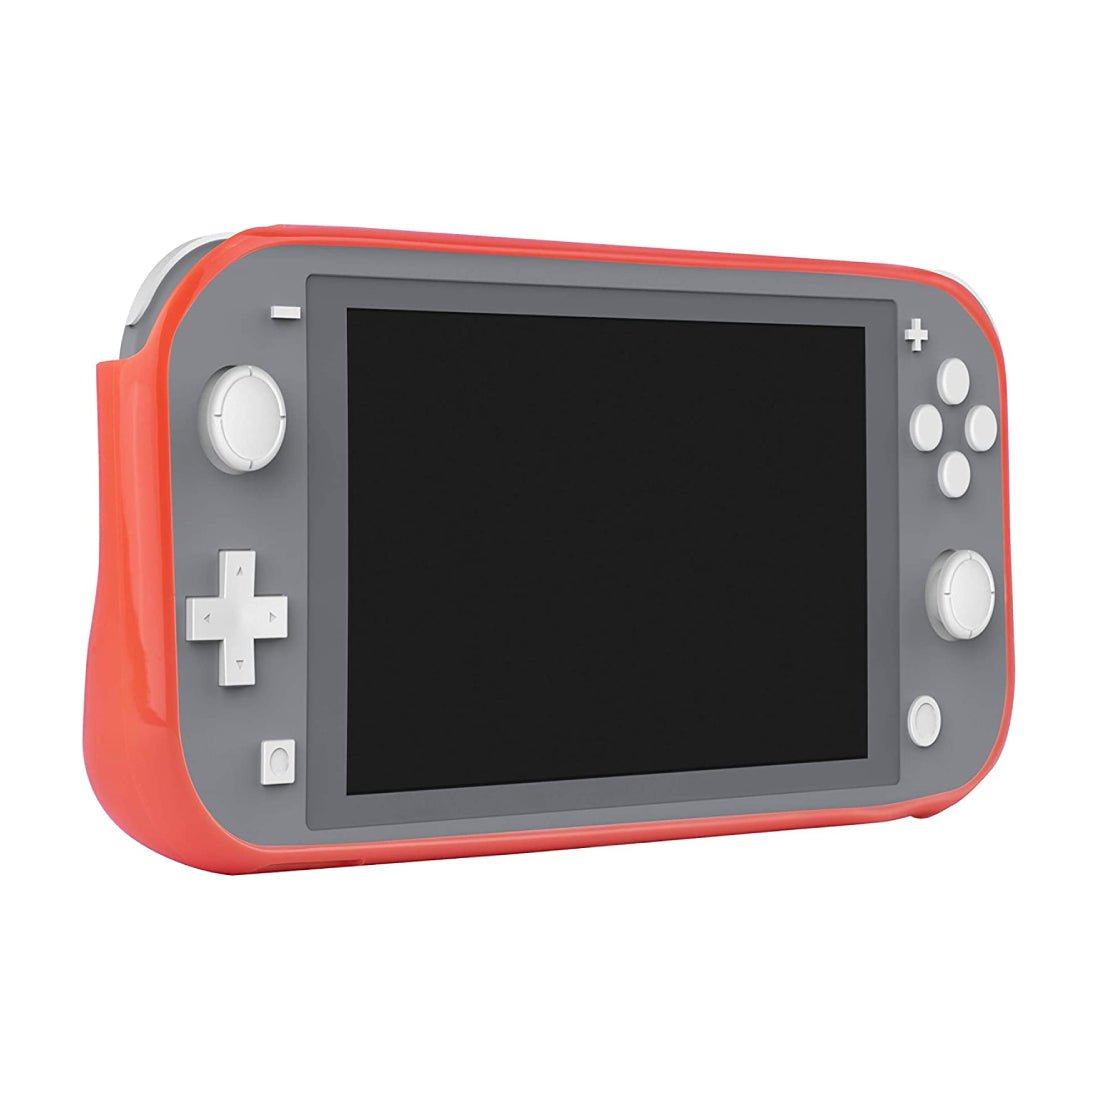 FR-TEC Bumper Protector + Grips for Nintendo Switch Lite - Store 974 | ستور ٩٧٤